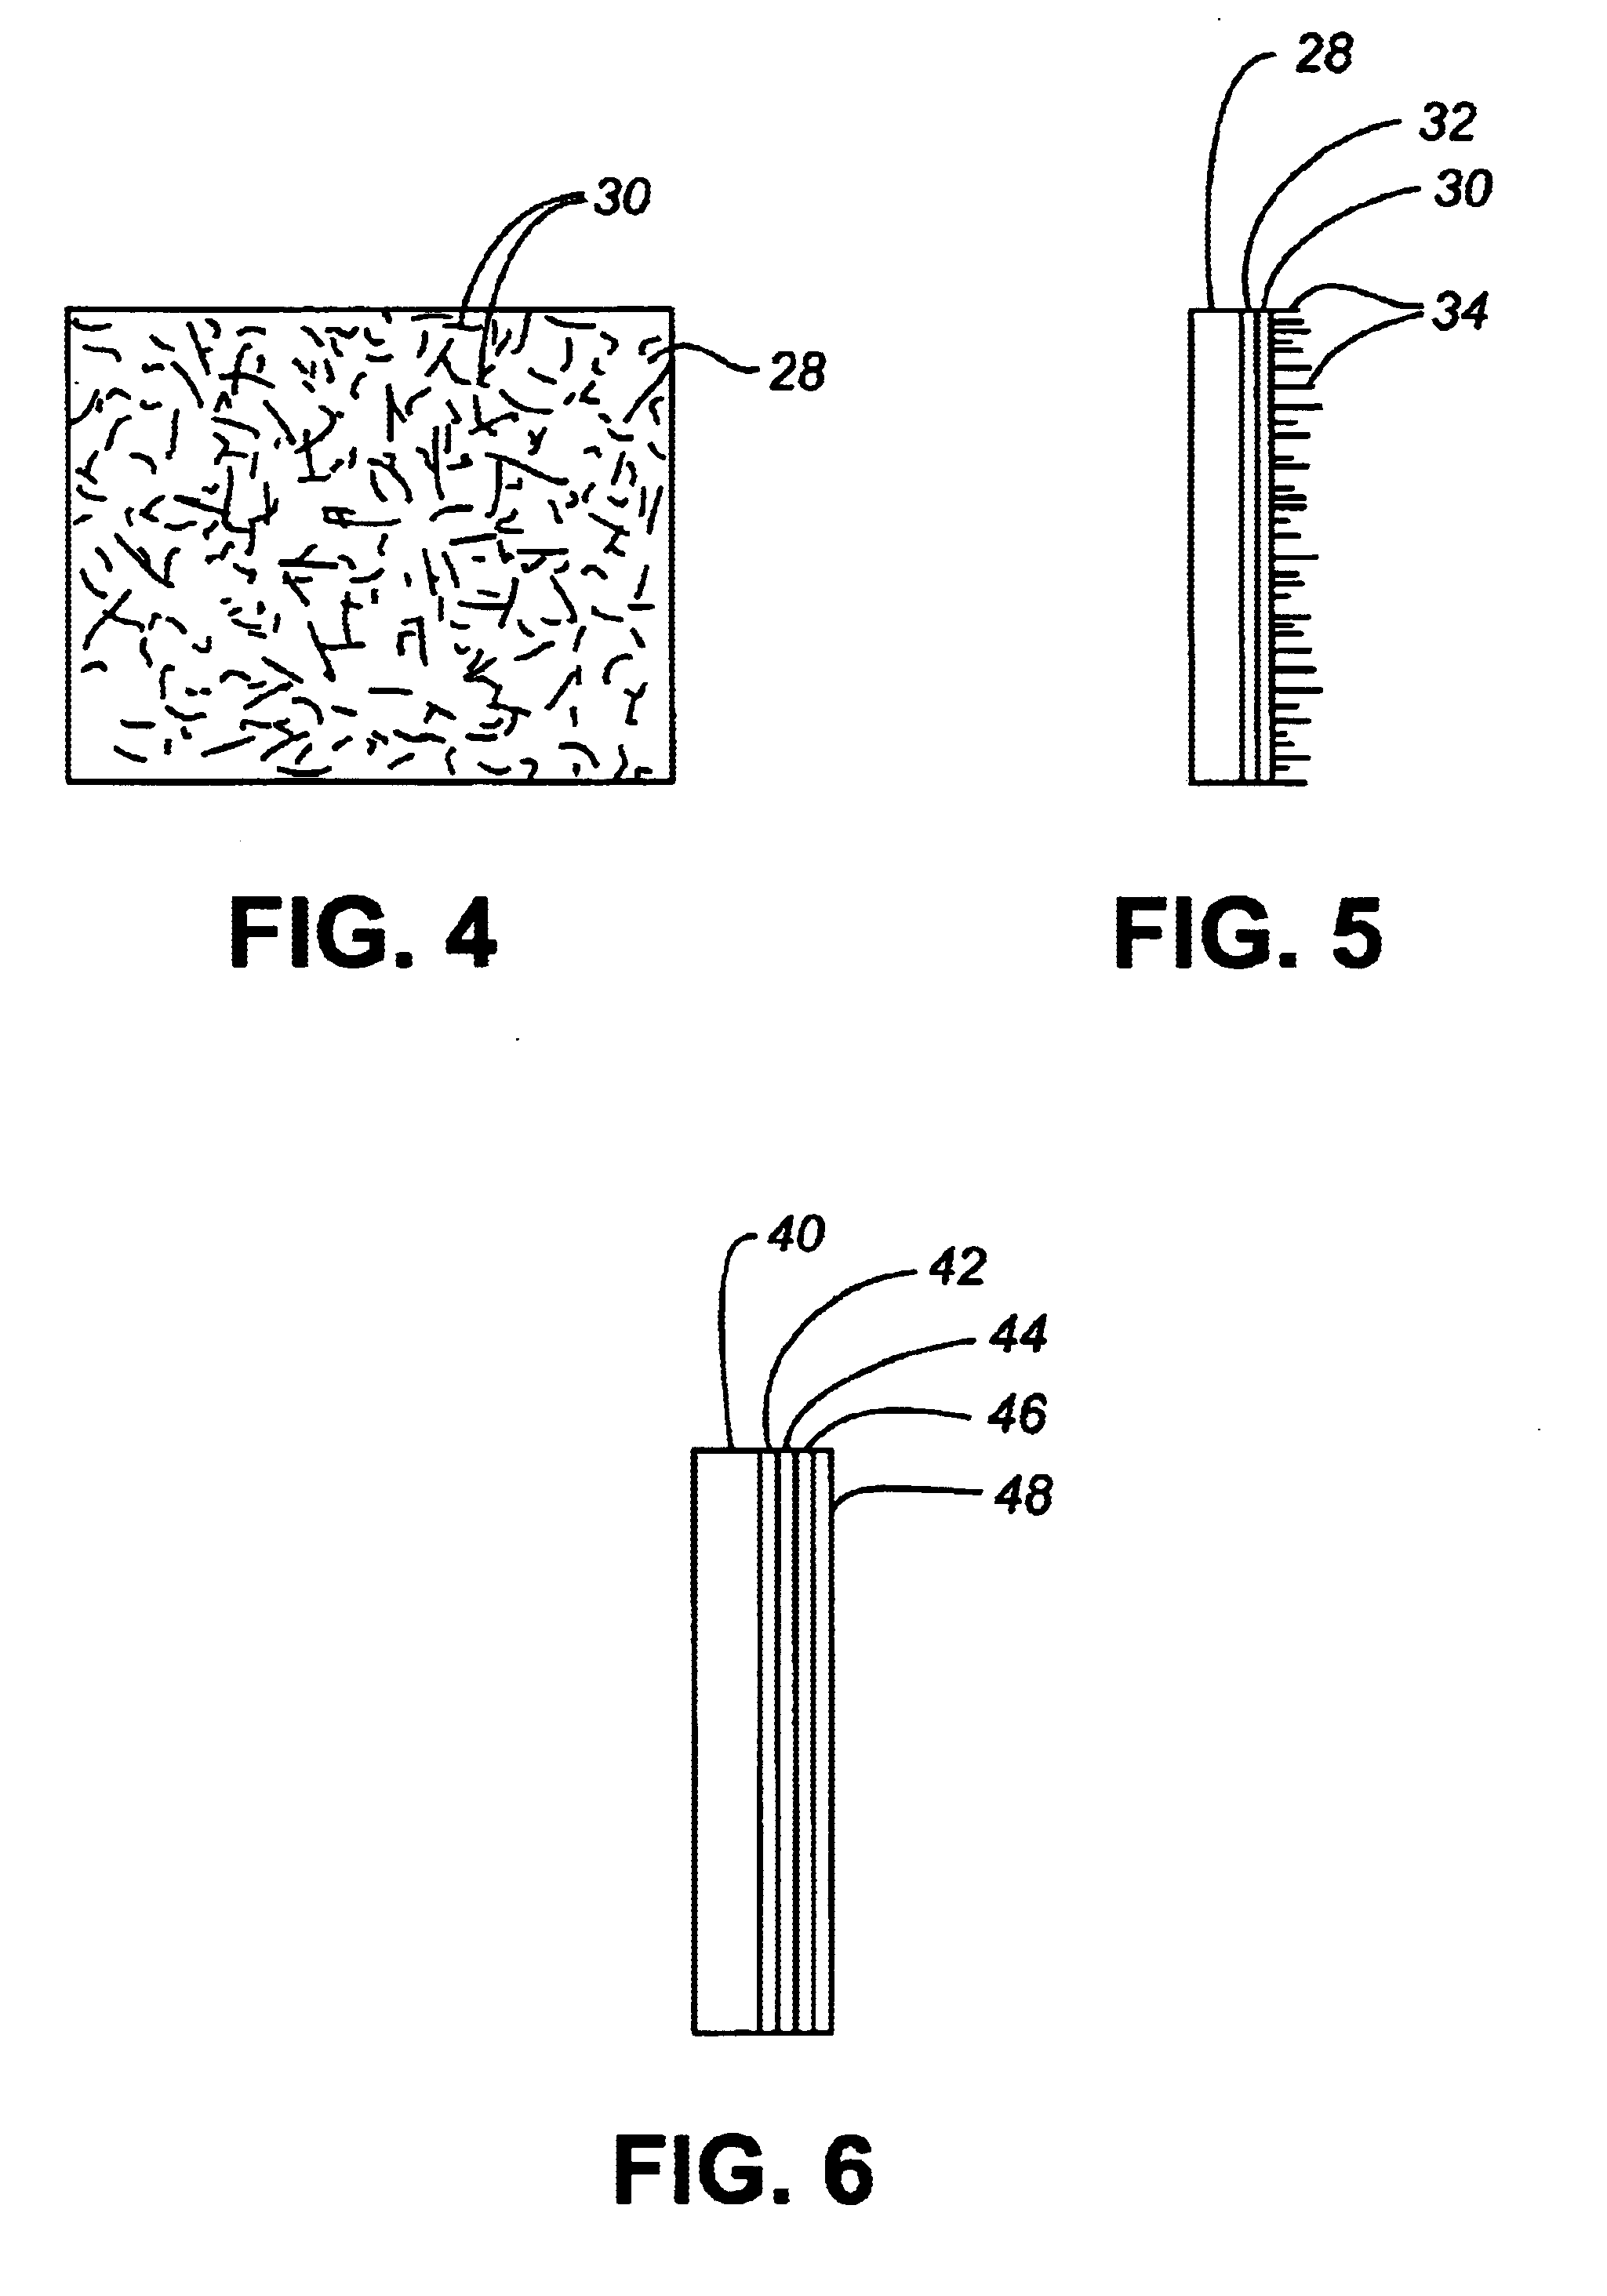 Ultrasonic process for autocatalytic deposition of metal on microparticulate